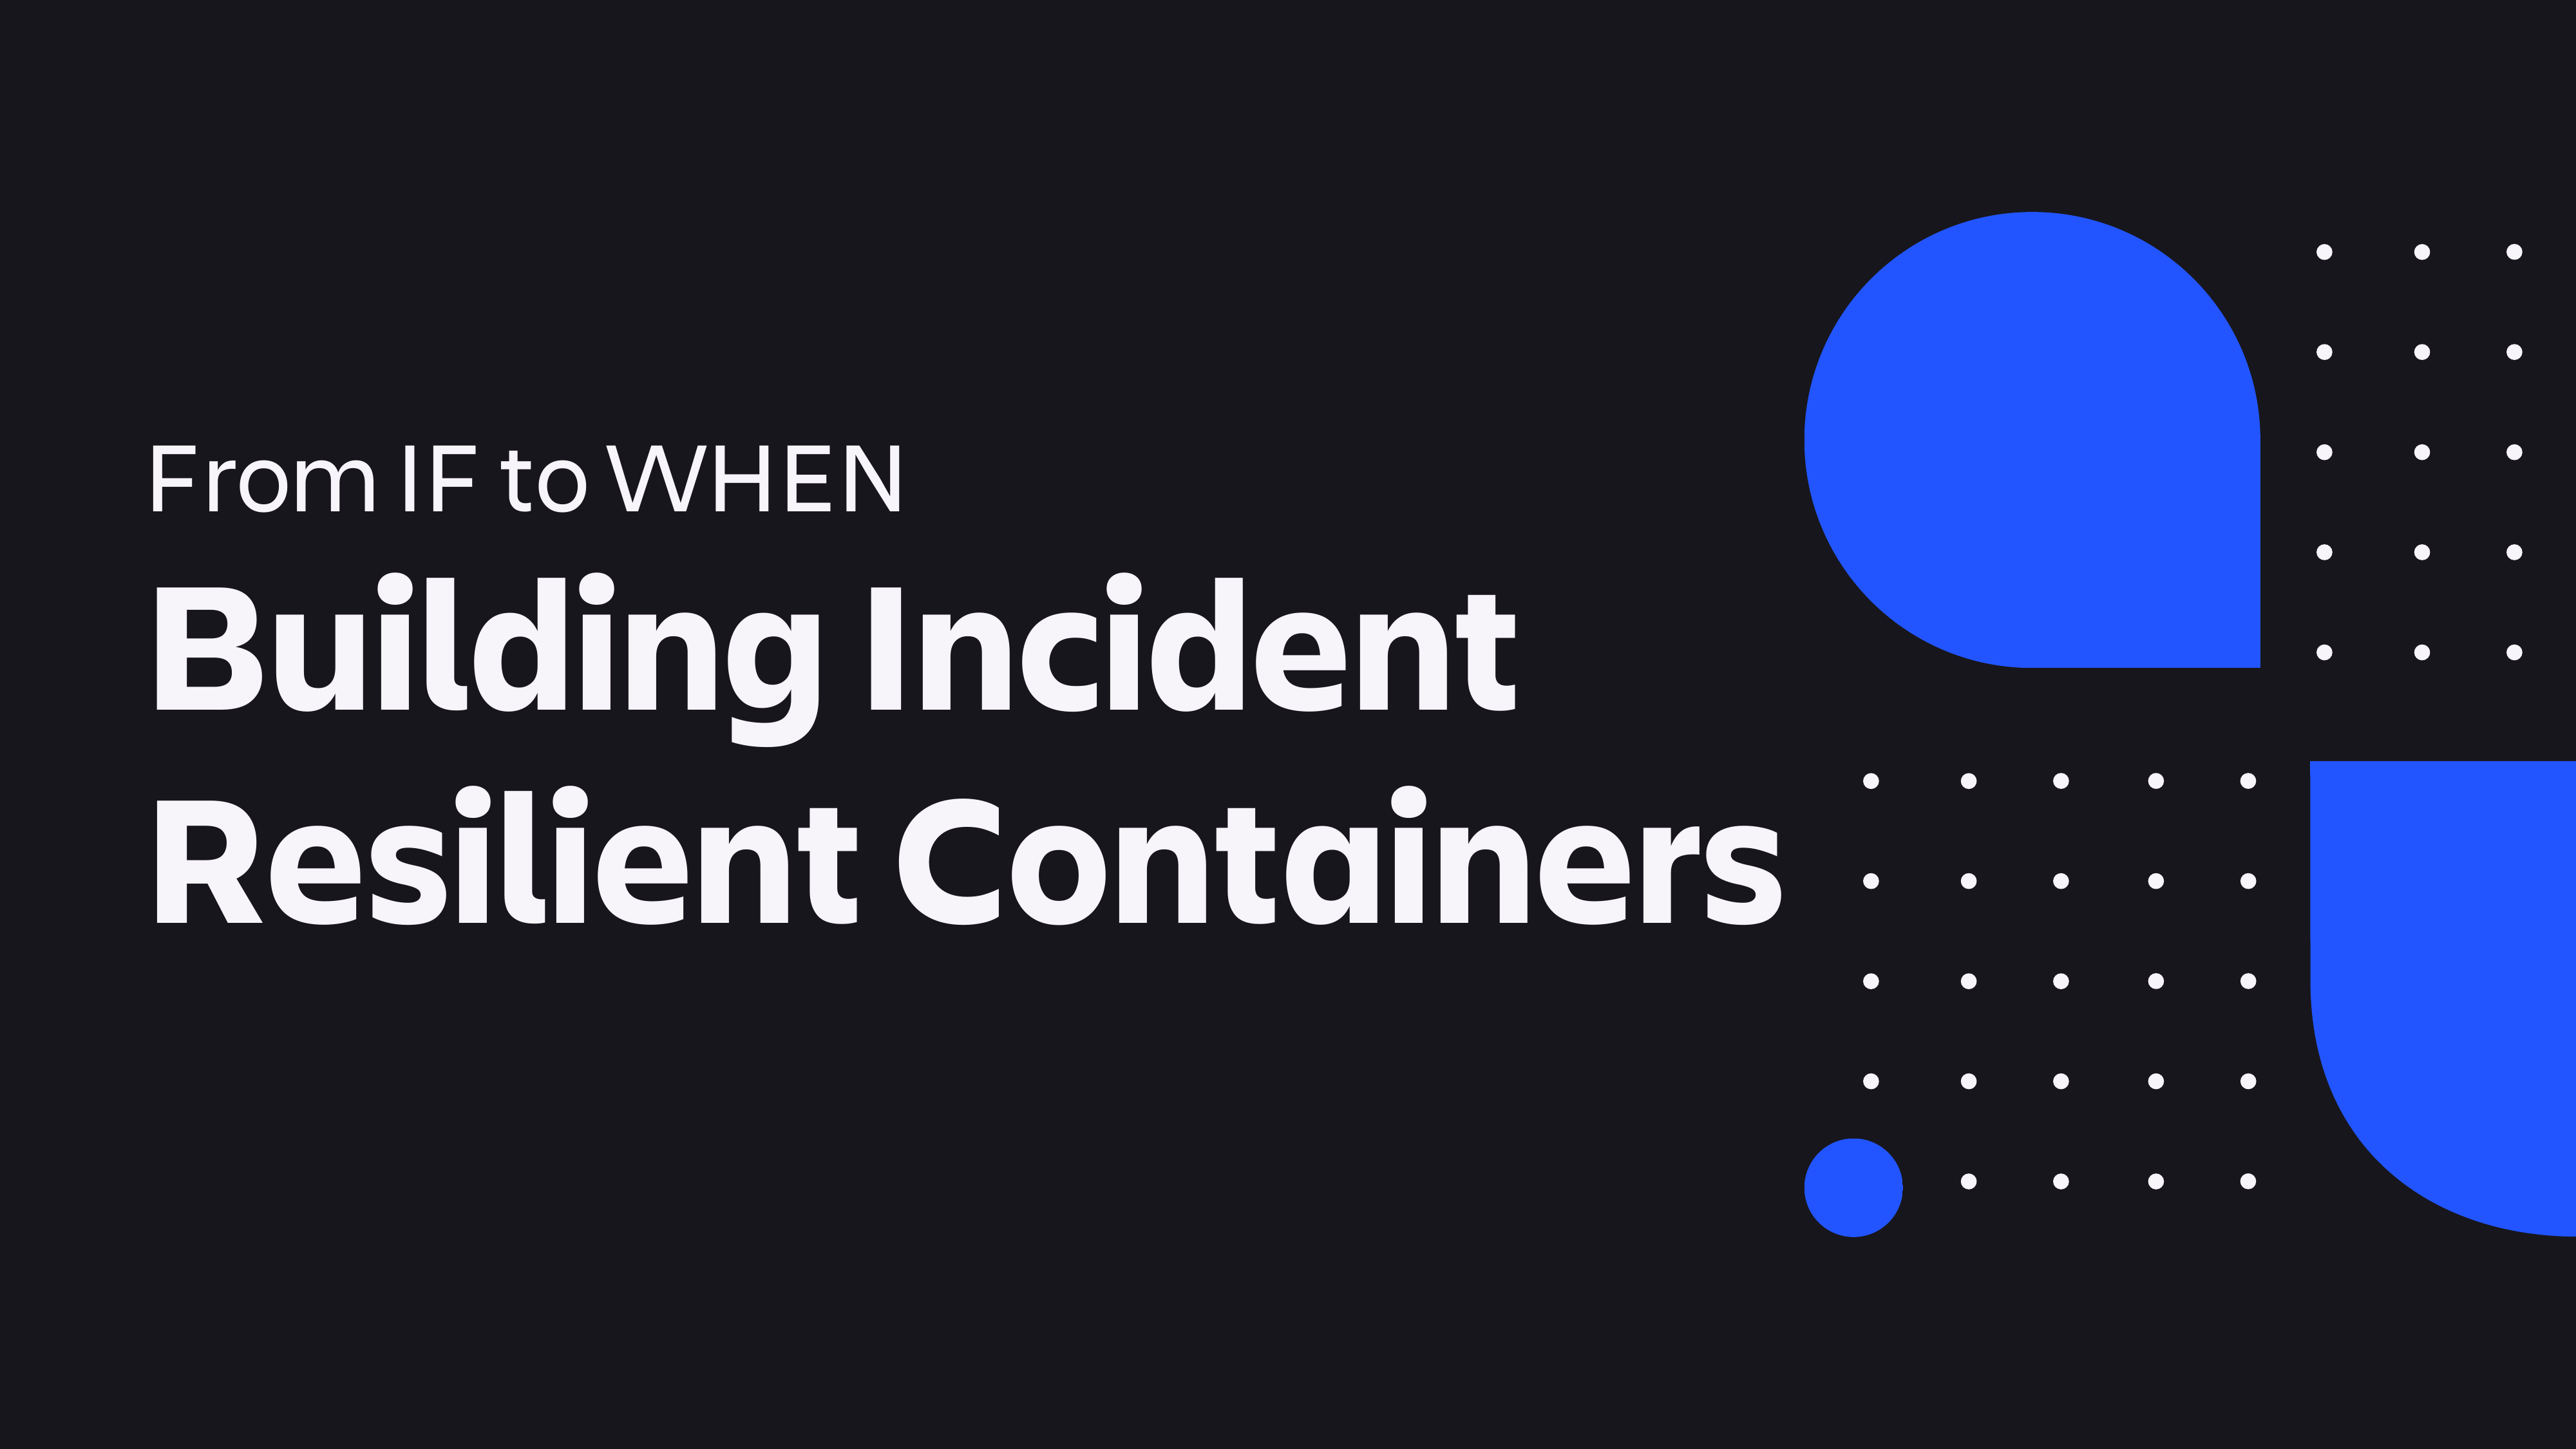 Building Incident Resilient Containers